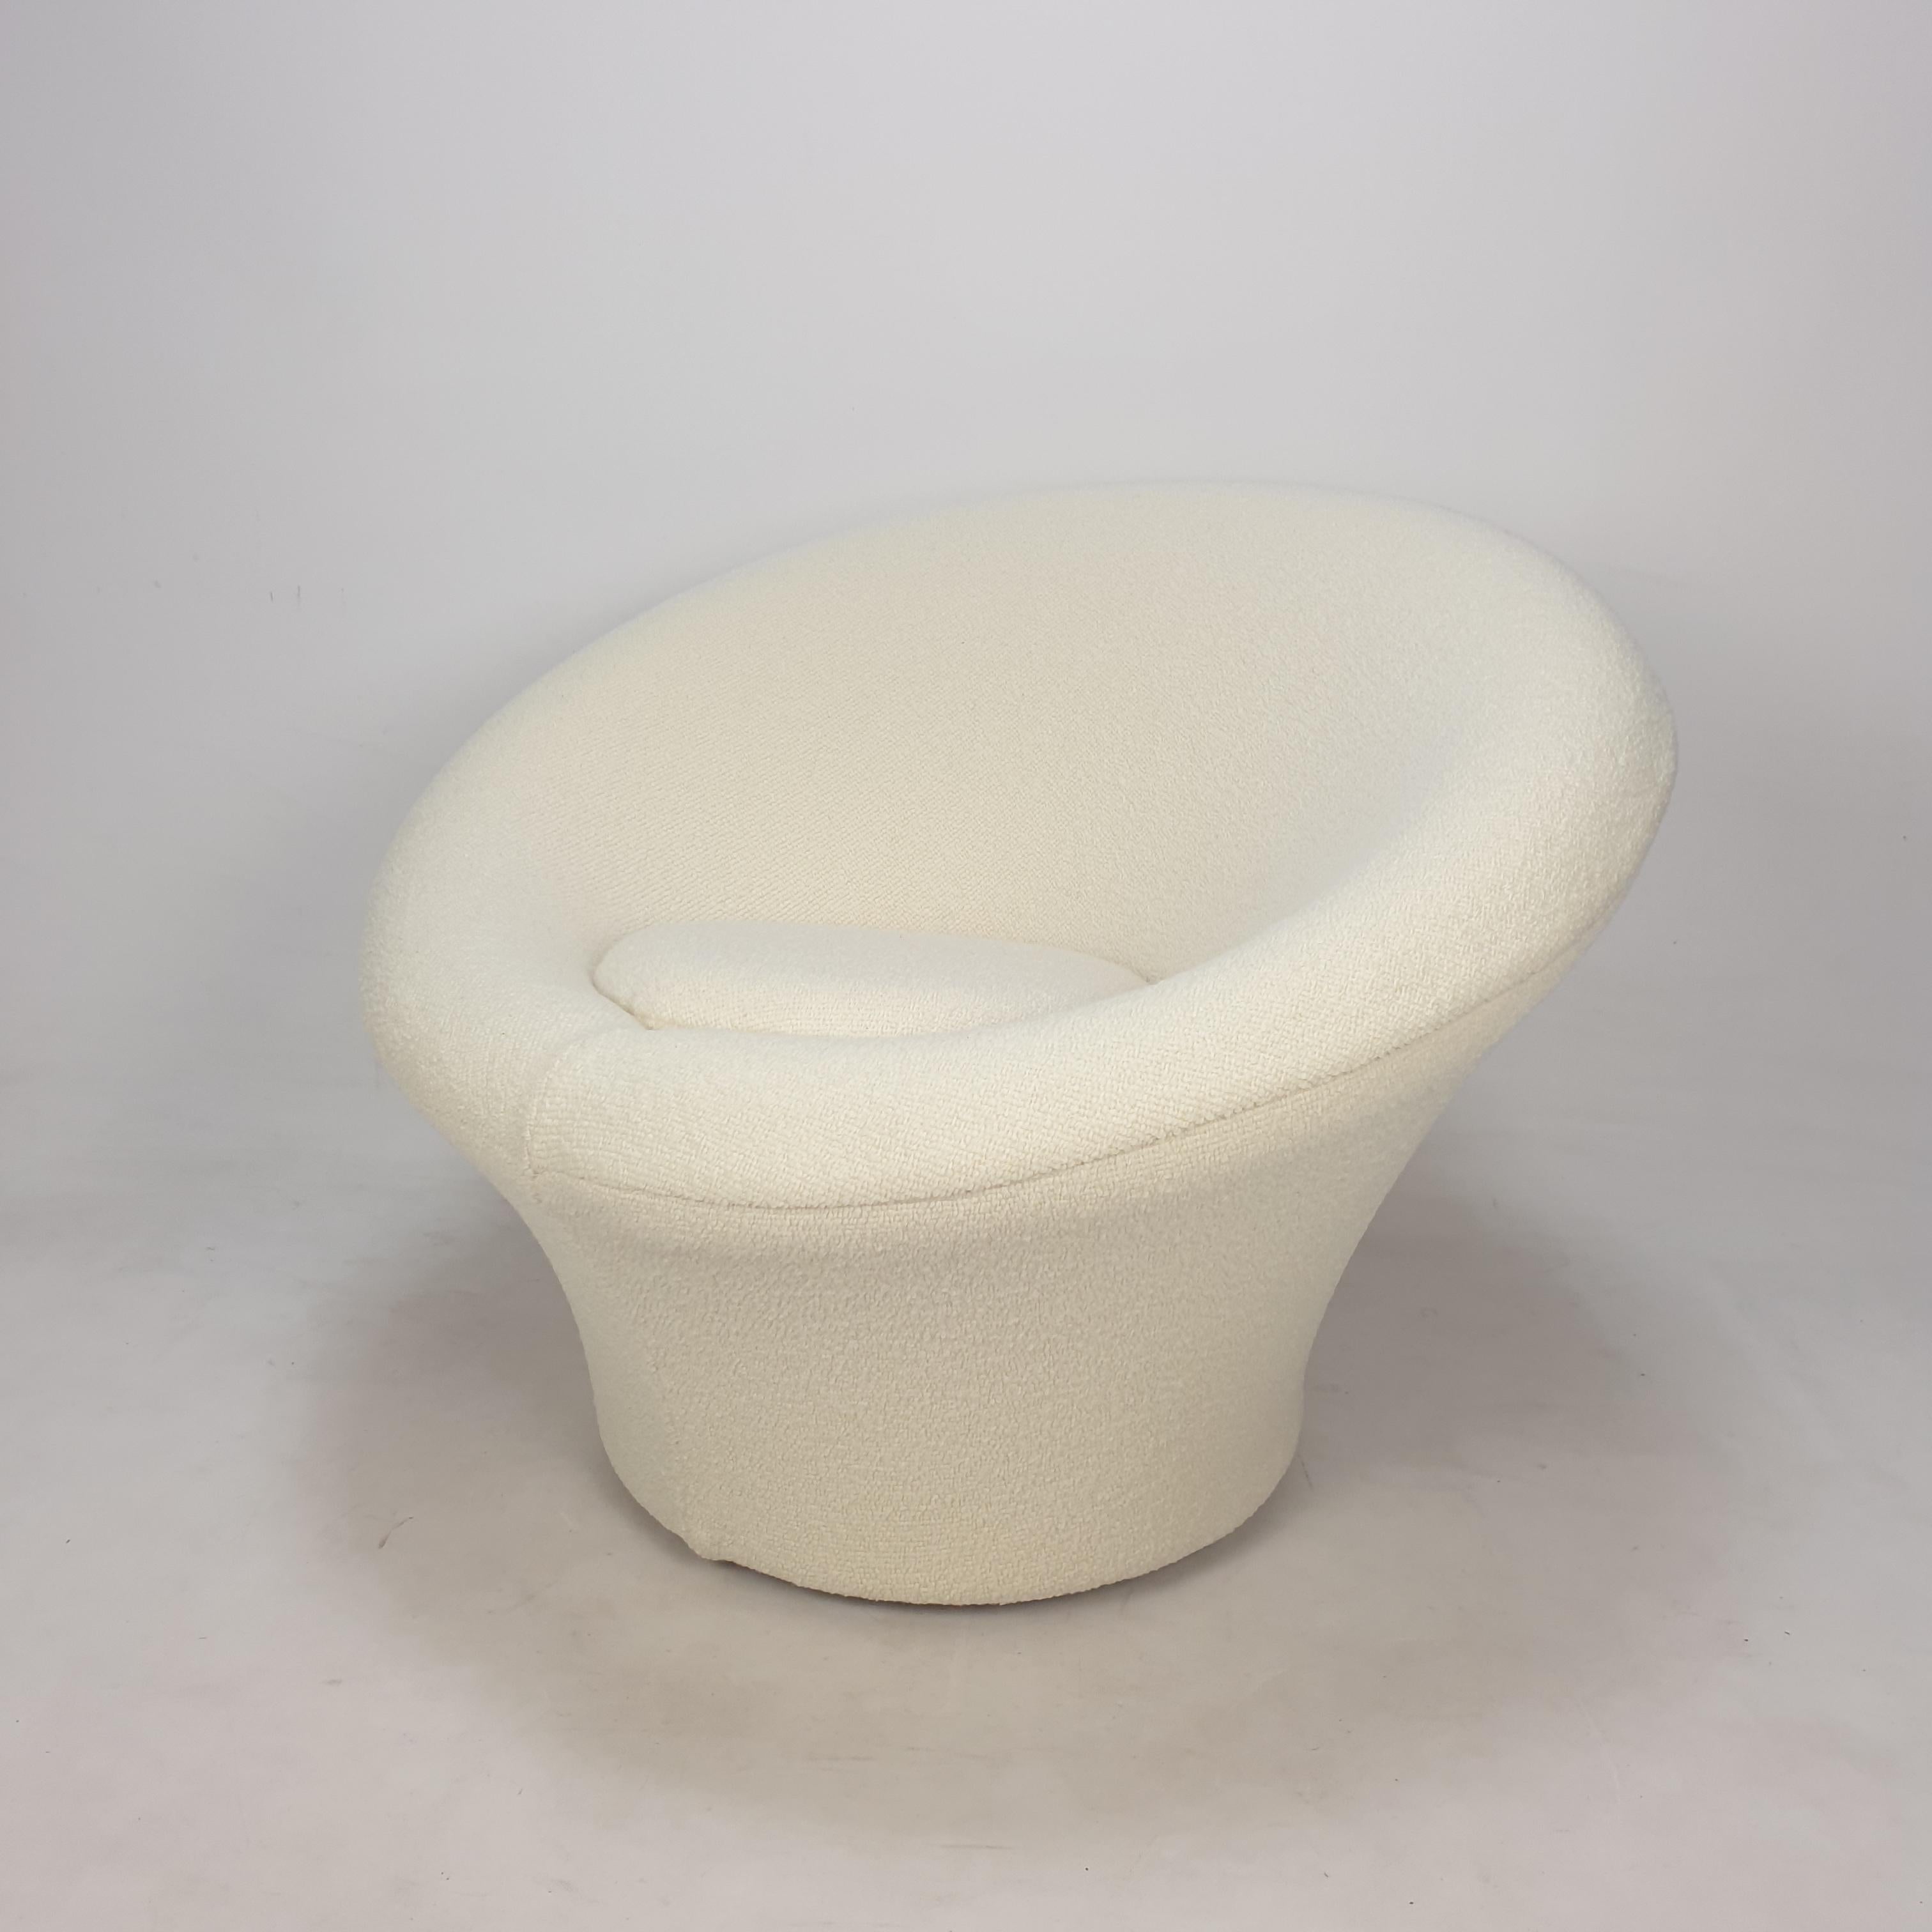 Very comfortable and cosy Artifort Mushroom, designed by Pierre Paulin in the 60’s. 

Covered with high quality Pierre Frey bouclé fabric, color crème.

The chair is just restored with new fabric, it is in perfect condition.

This is a